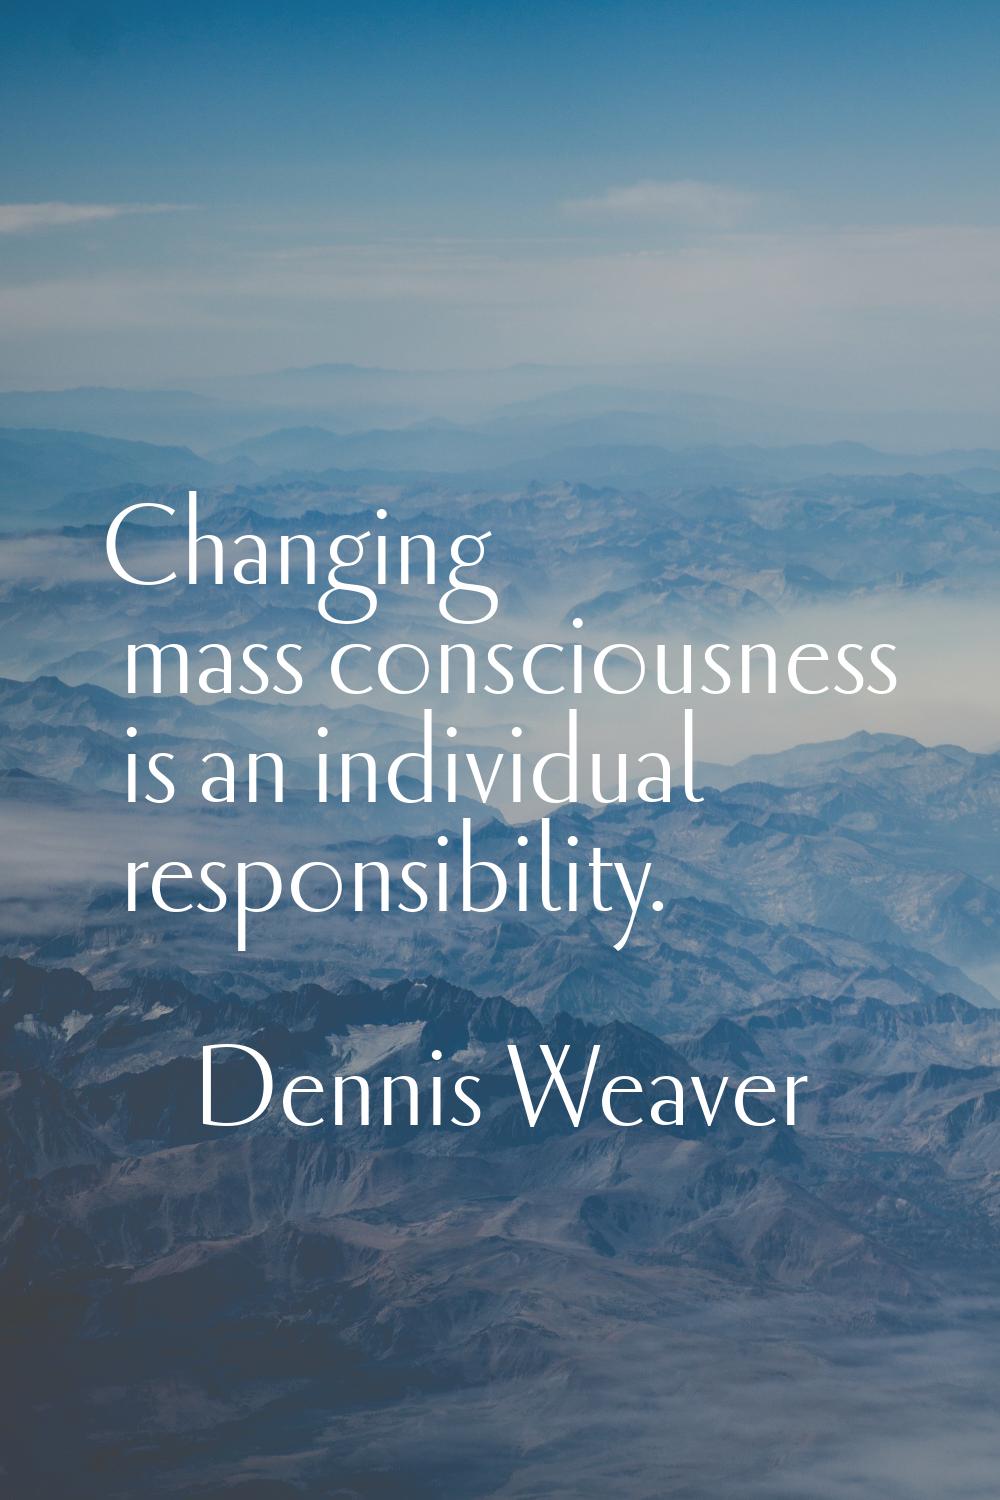 Changing mass consciousness is an individual responsibility.